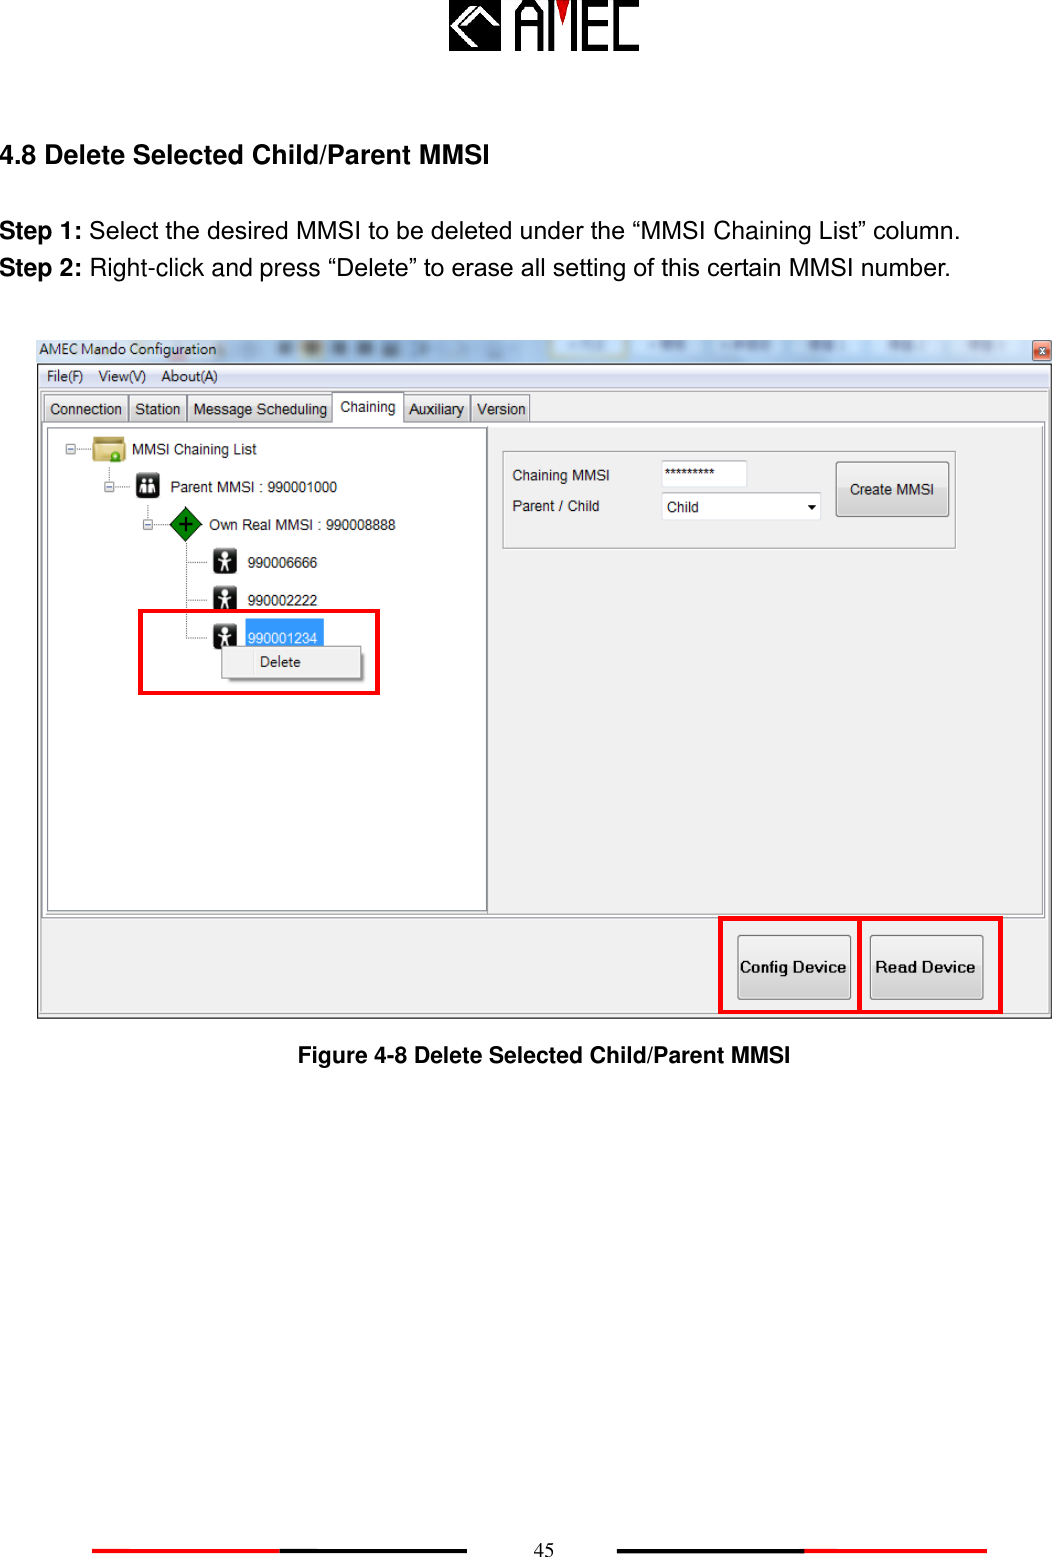    45 4.8 Delete Selected Child/Parent MMSI Step 1: Select the desired MMSI to be deleted under the “MMSI Chaining List” column. Step 2: Right-click and press “Delete” to erase all setting of this certain MMSI number.   Figure 4-8 Delete Selected Child/Parent MMSI       